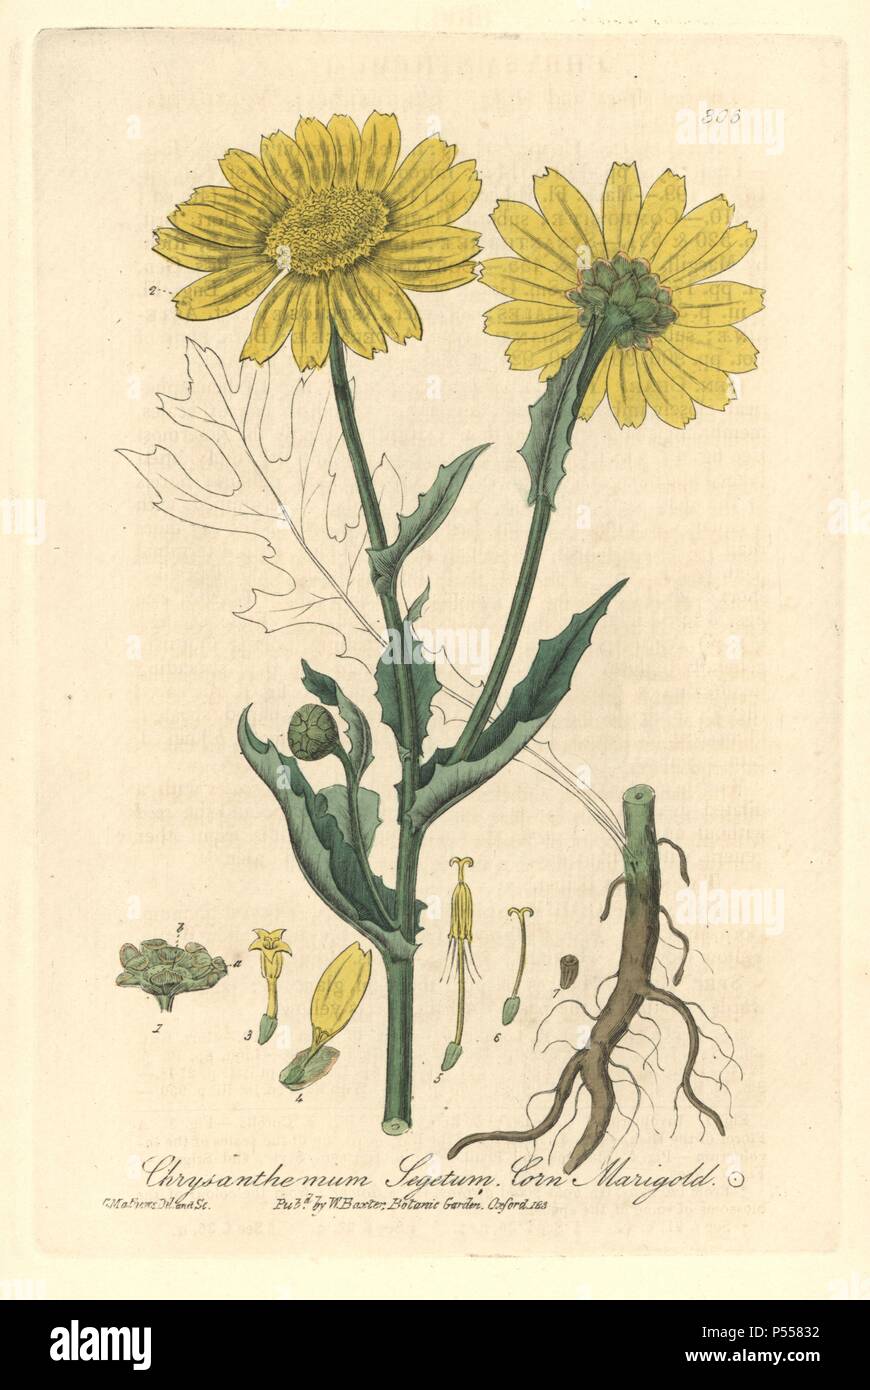 Corn marigold, Chrysanthemum segetum. Handcoloured copperplate drawn and engraved by Charles Mathews from William Baxter's "British Phaenogamous Botany," Oxford, 1838. Scotsman William Baxter (1788-1871) was the curator of the Oxford Botanic Garden from 1813 to 1854. Stock Photo